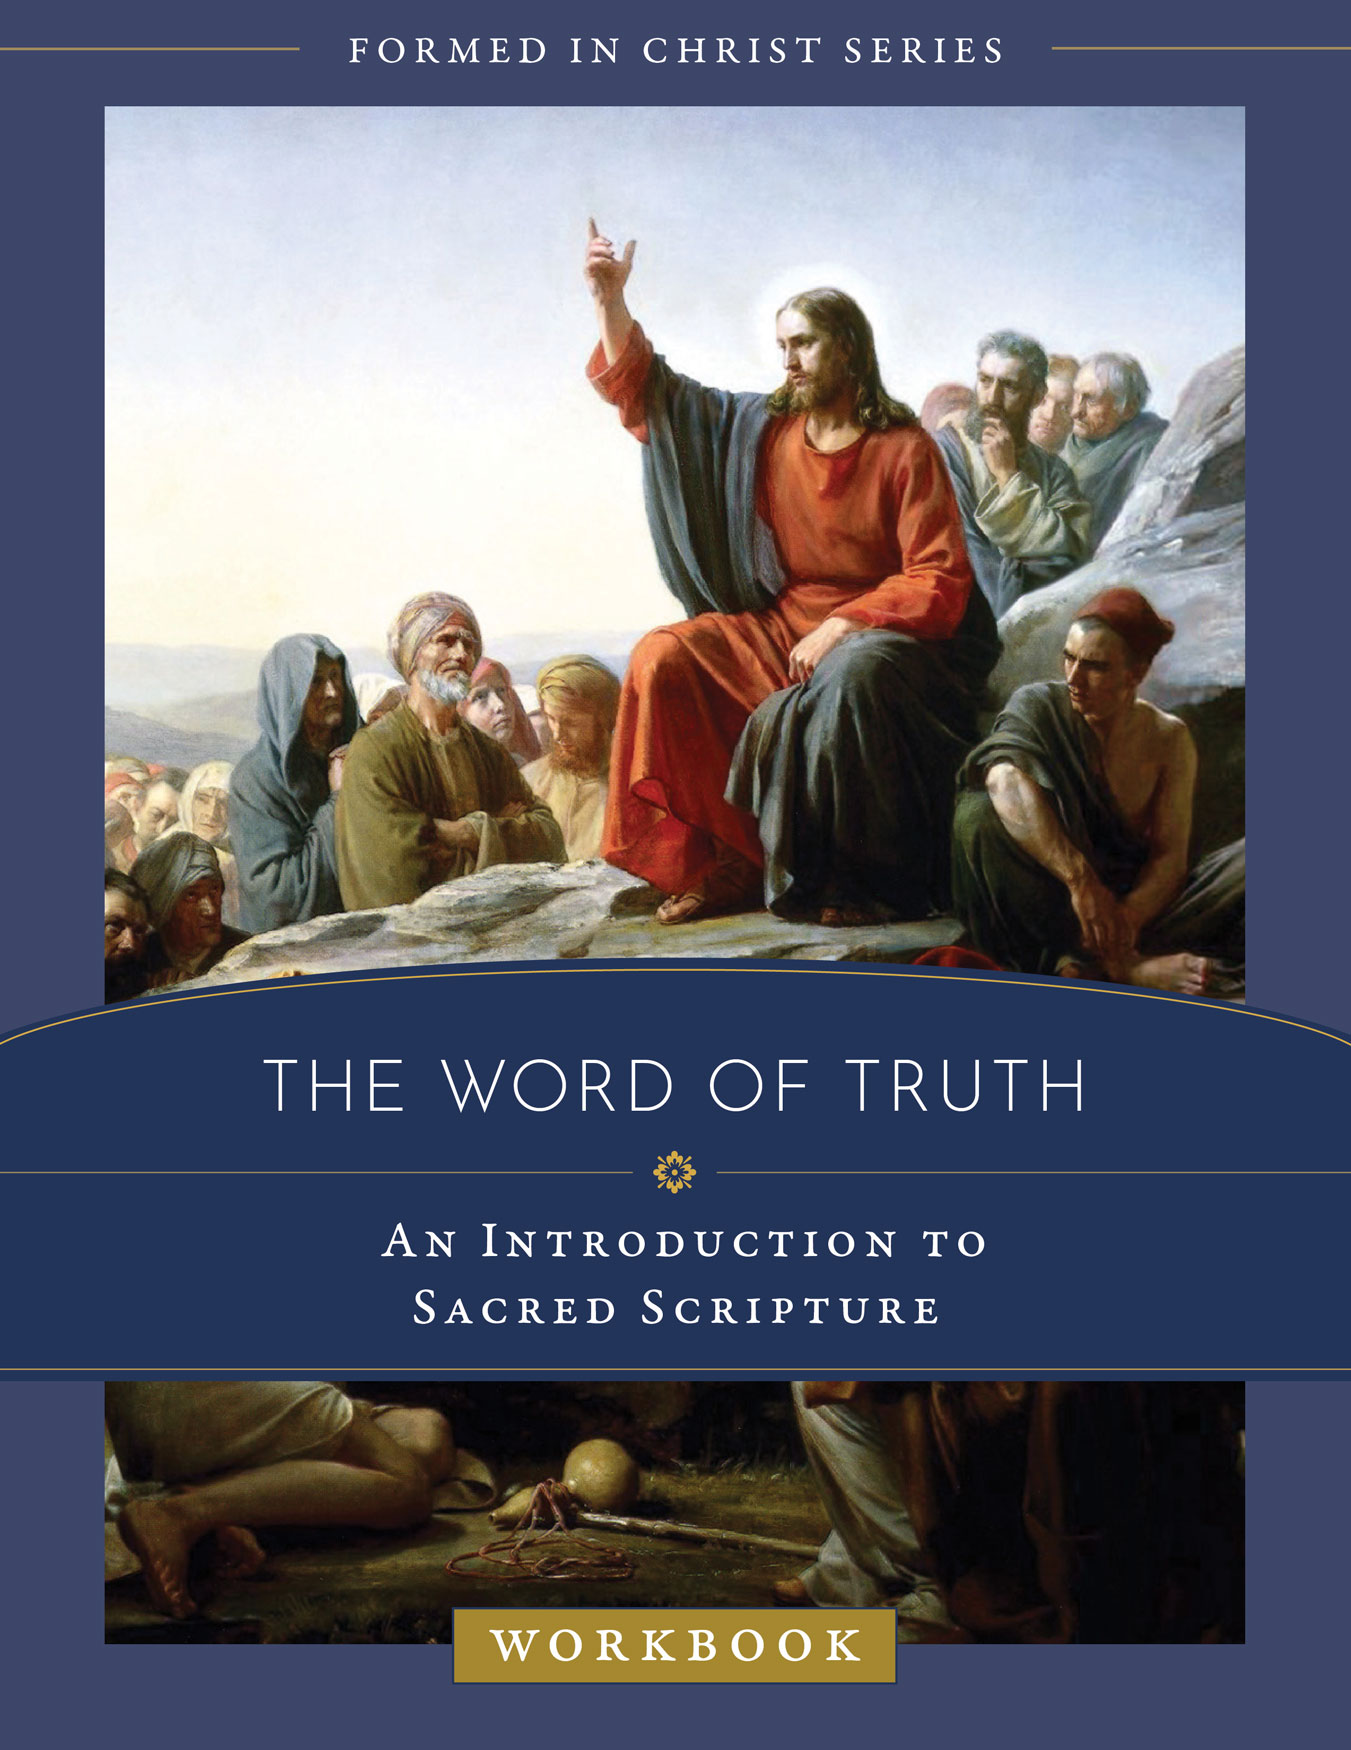 Formed in Christ The Word of Truth Workbook